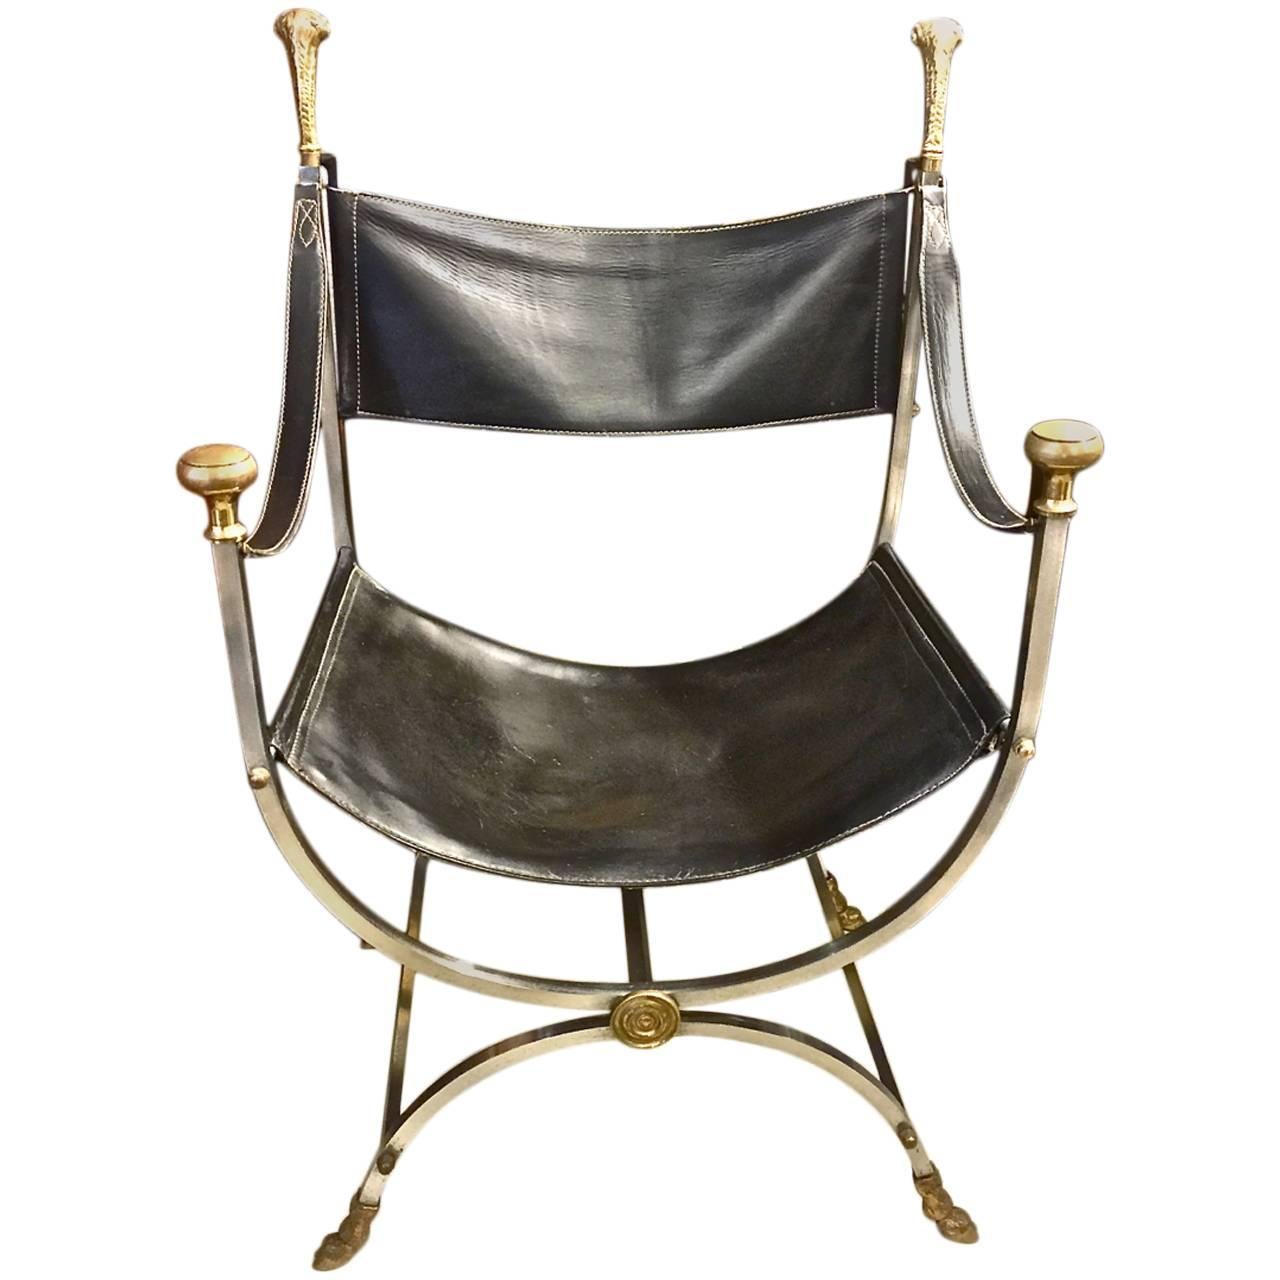 Iconic Maison Jansen steel and brass Savonarola chairs dating to 1960-70. The chair is in excellent condition and retains its original black leather upholstery. The polished steel,
as well as the brass adornments, are in very good condition. The